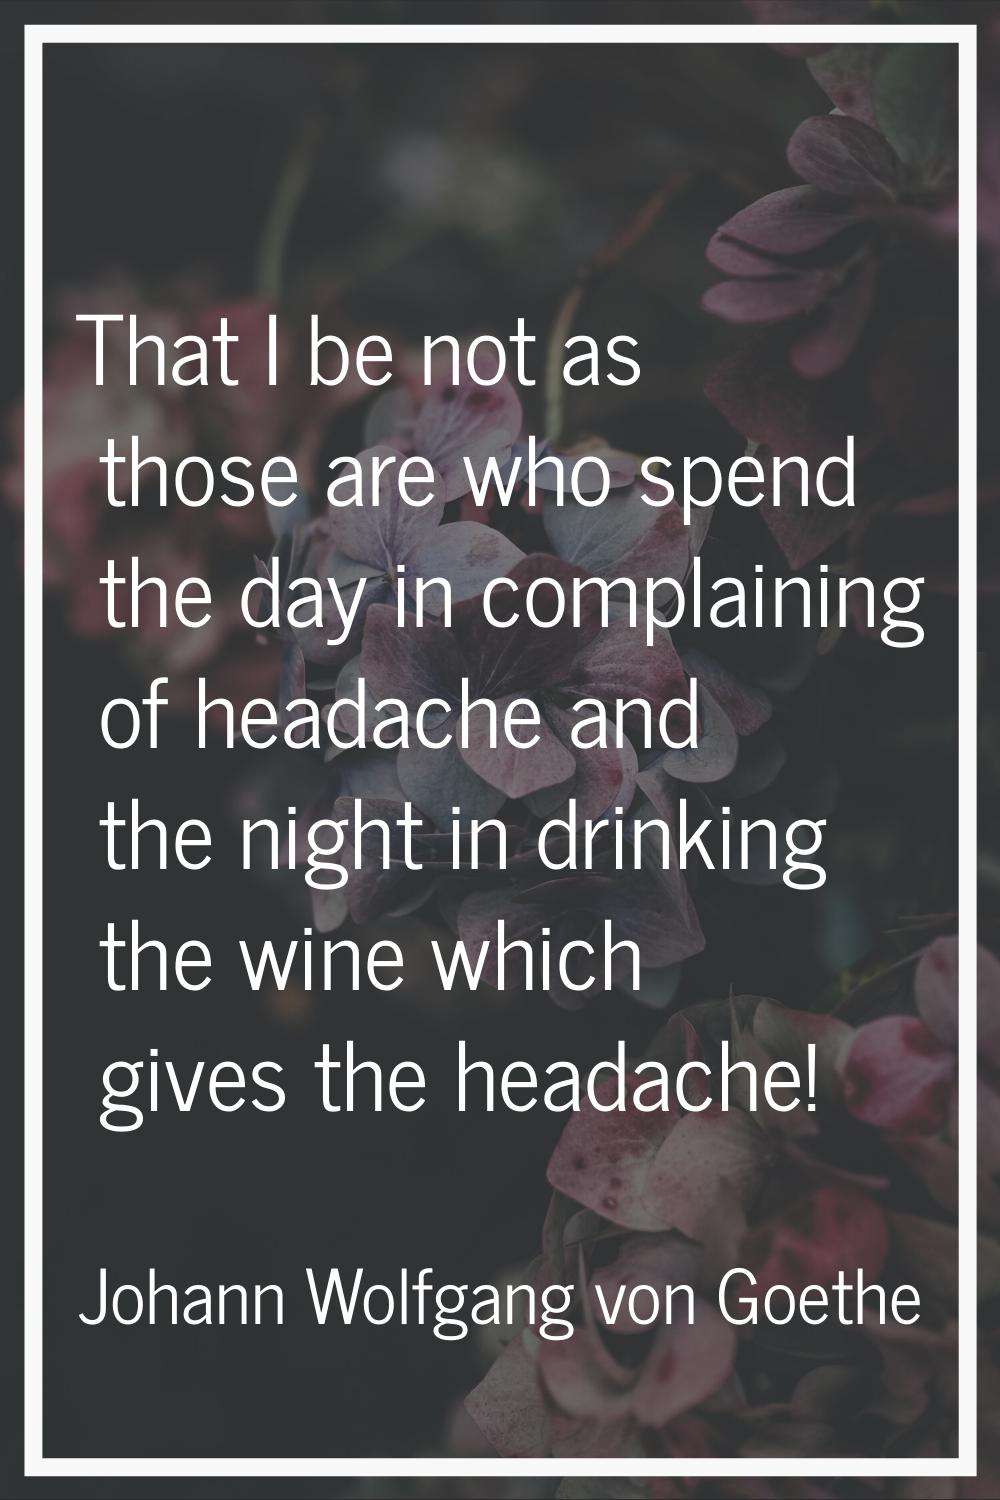 That I be not as those are who spend the day in complaining of headache and the night in drinking t